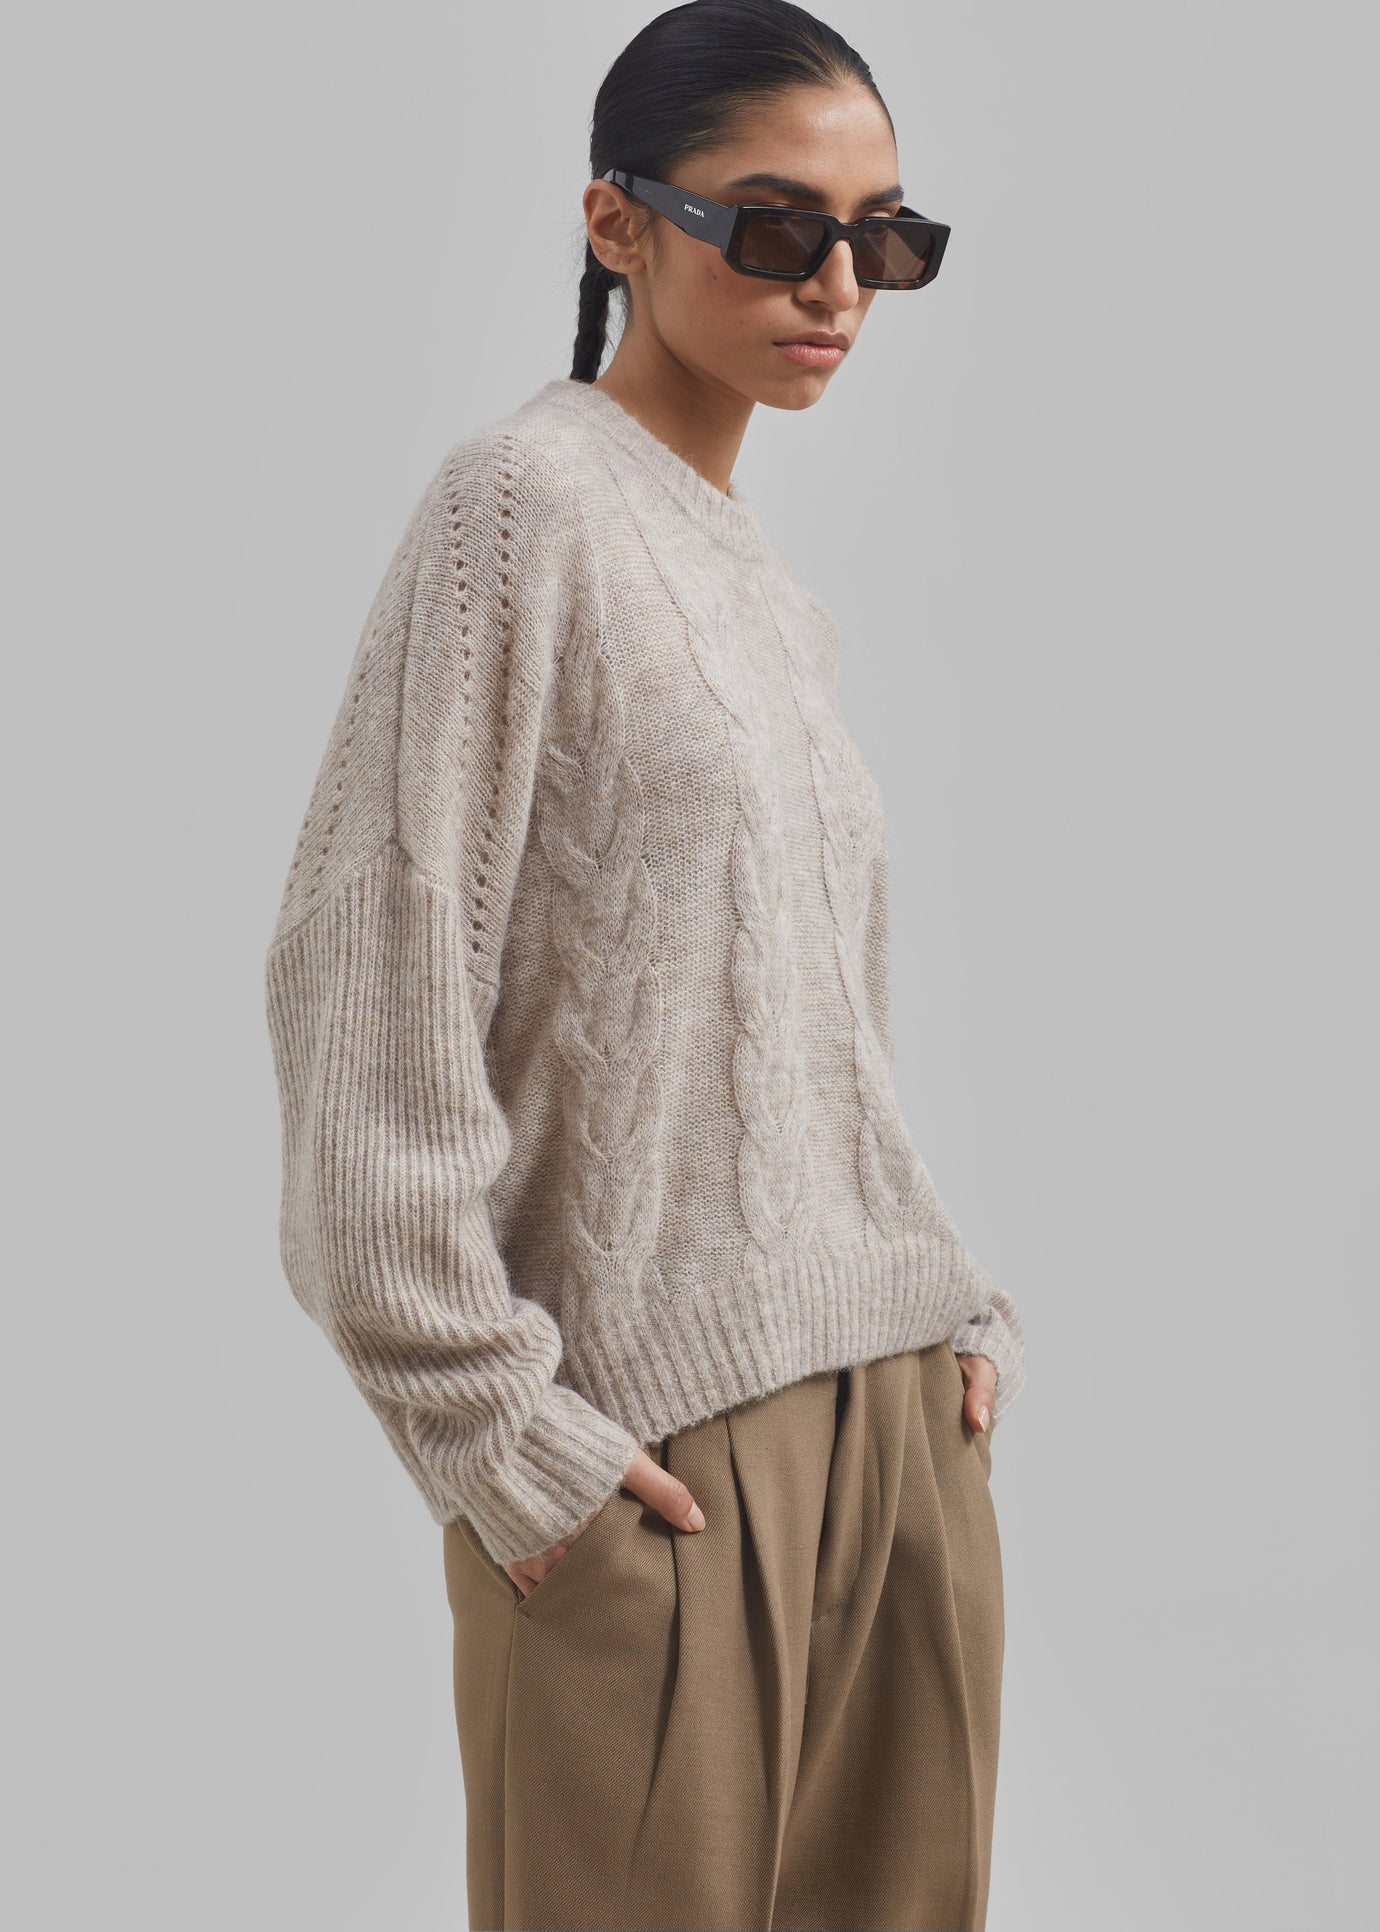 The Garment Verbier Boxy Cable Sweater - Linen